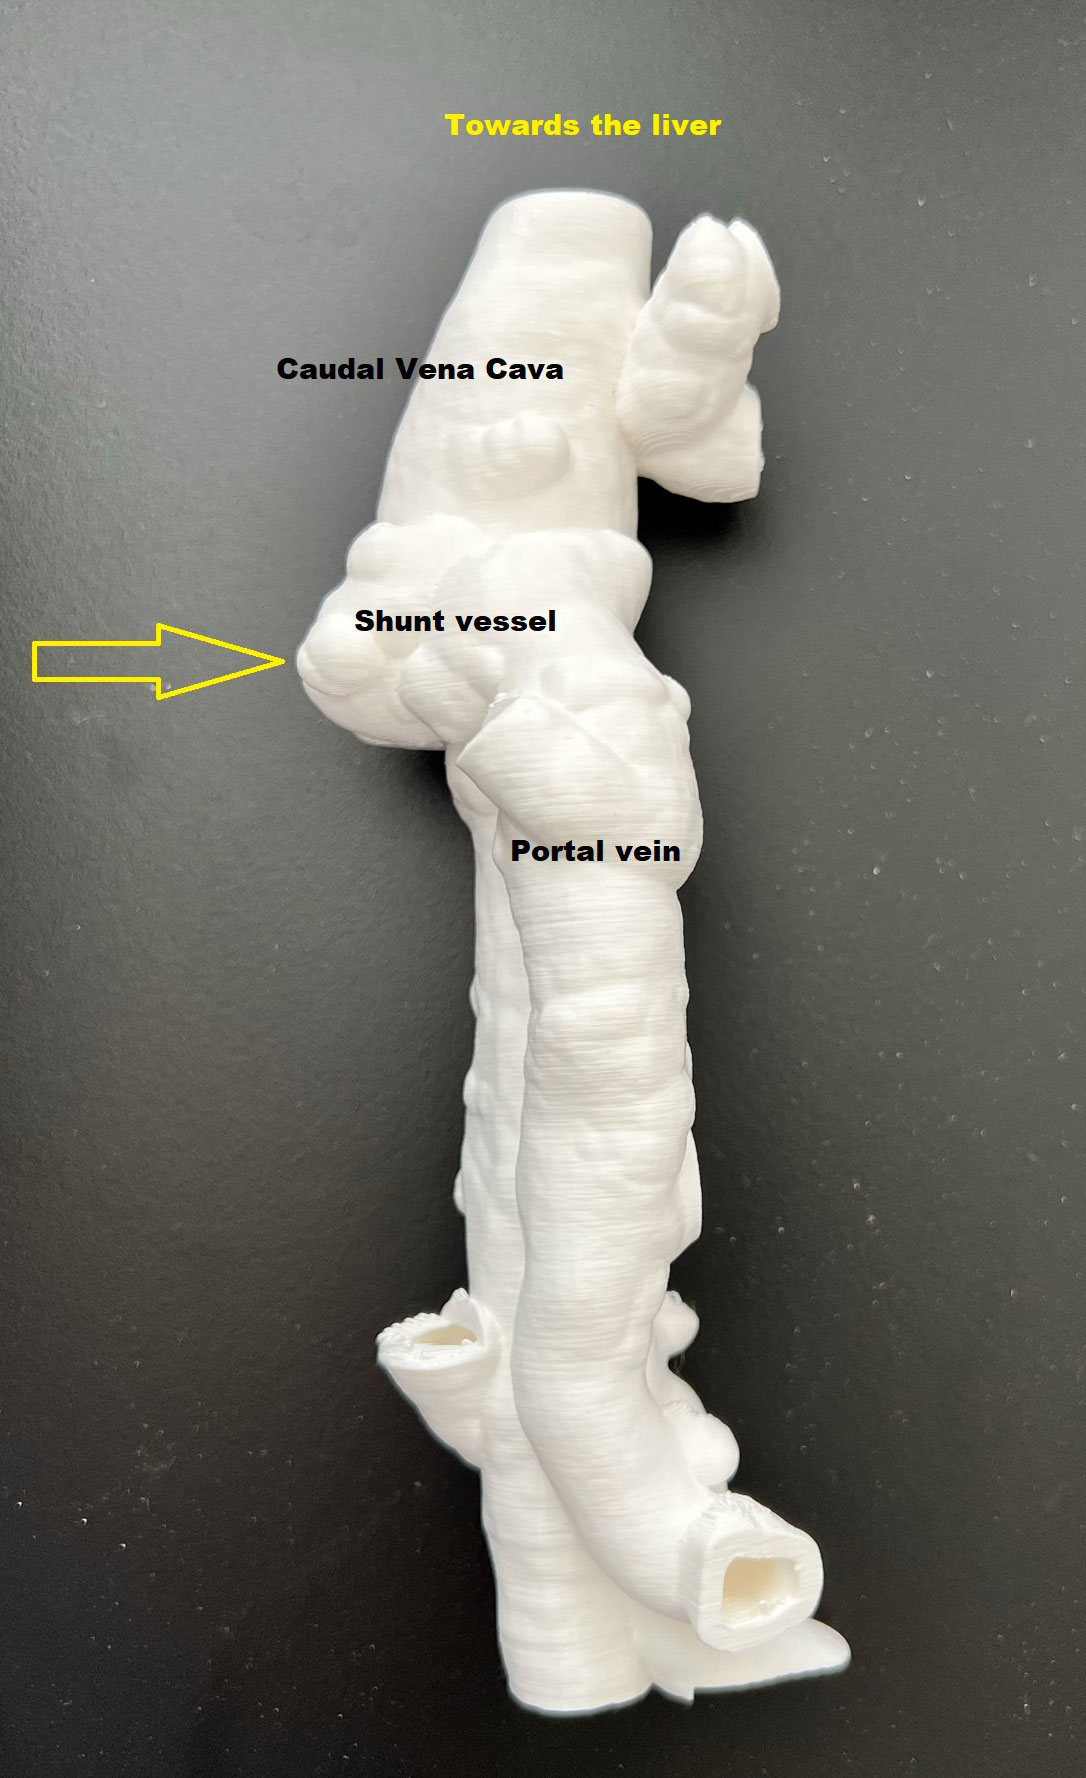 A 3D image of a canine liver shunt